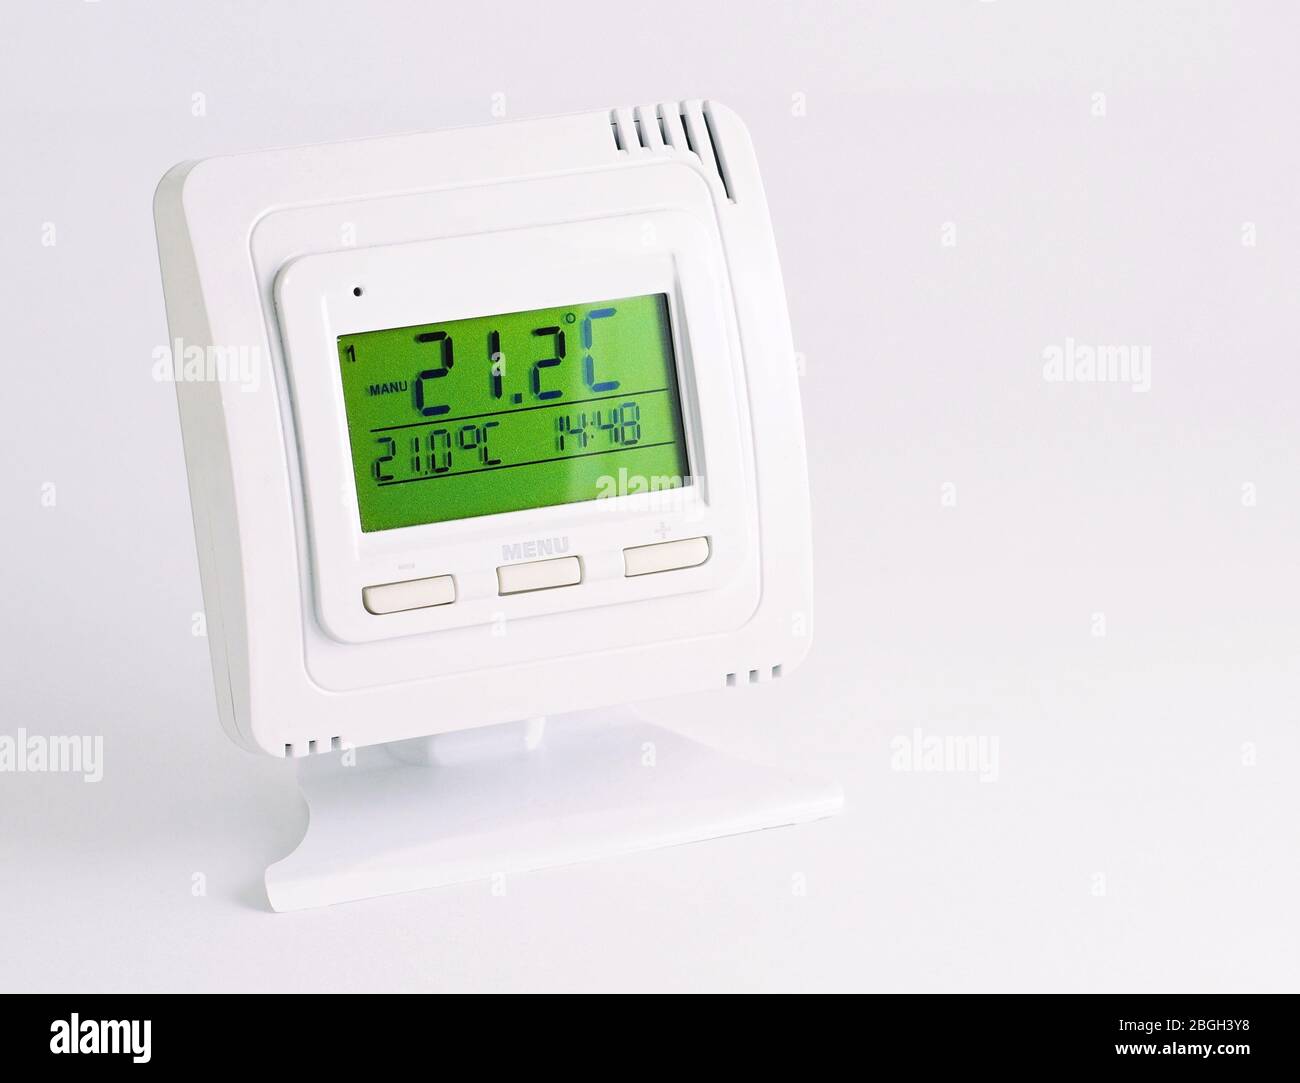 Remote home interior thermostat controller over white background. Stock Photo